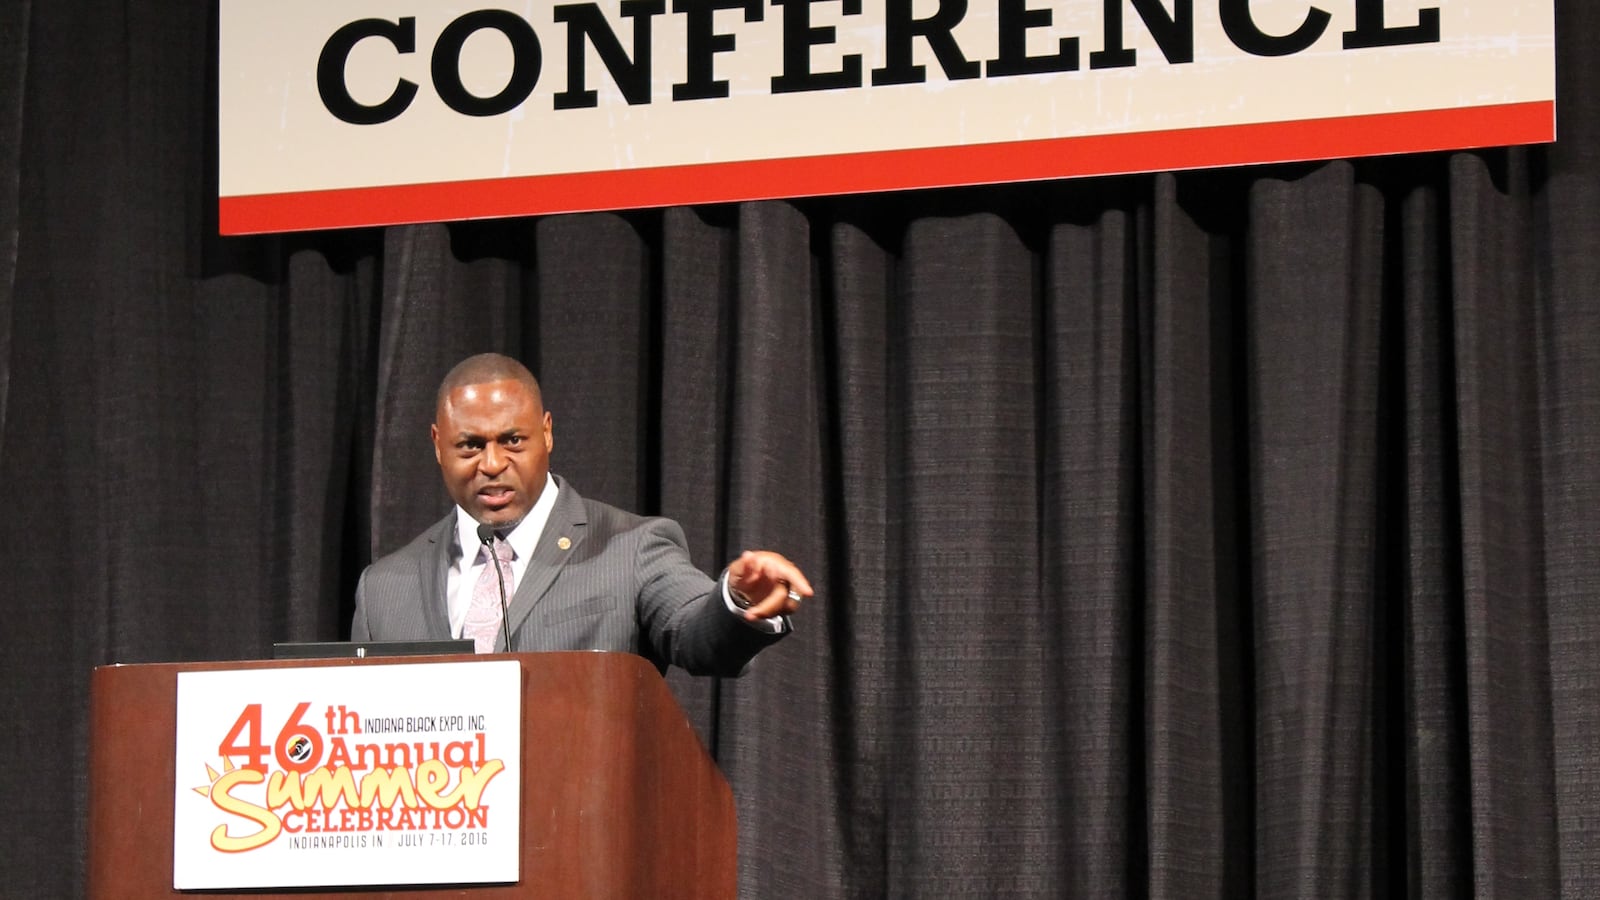 Robert Jackson, author of The No More Excuses Curriculum, speaks at the 2016 Indiana Black Expo's Education Conference.